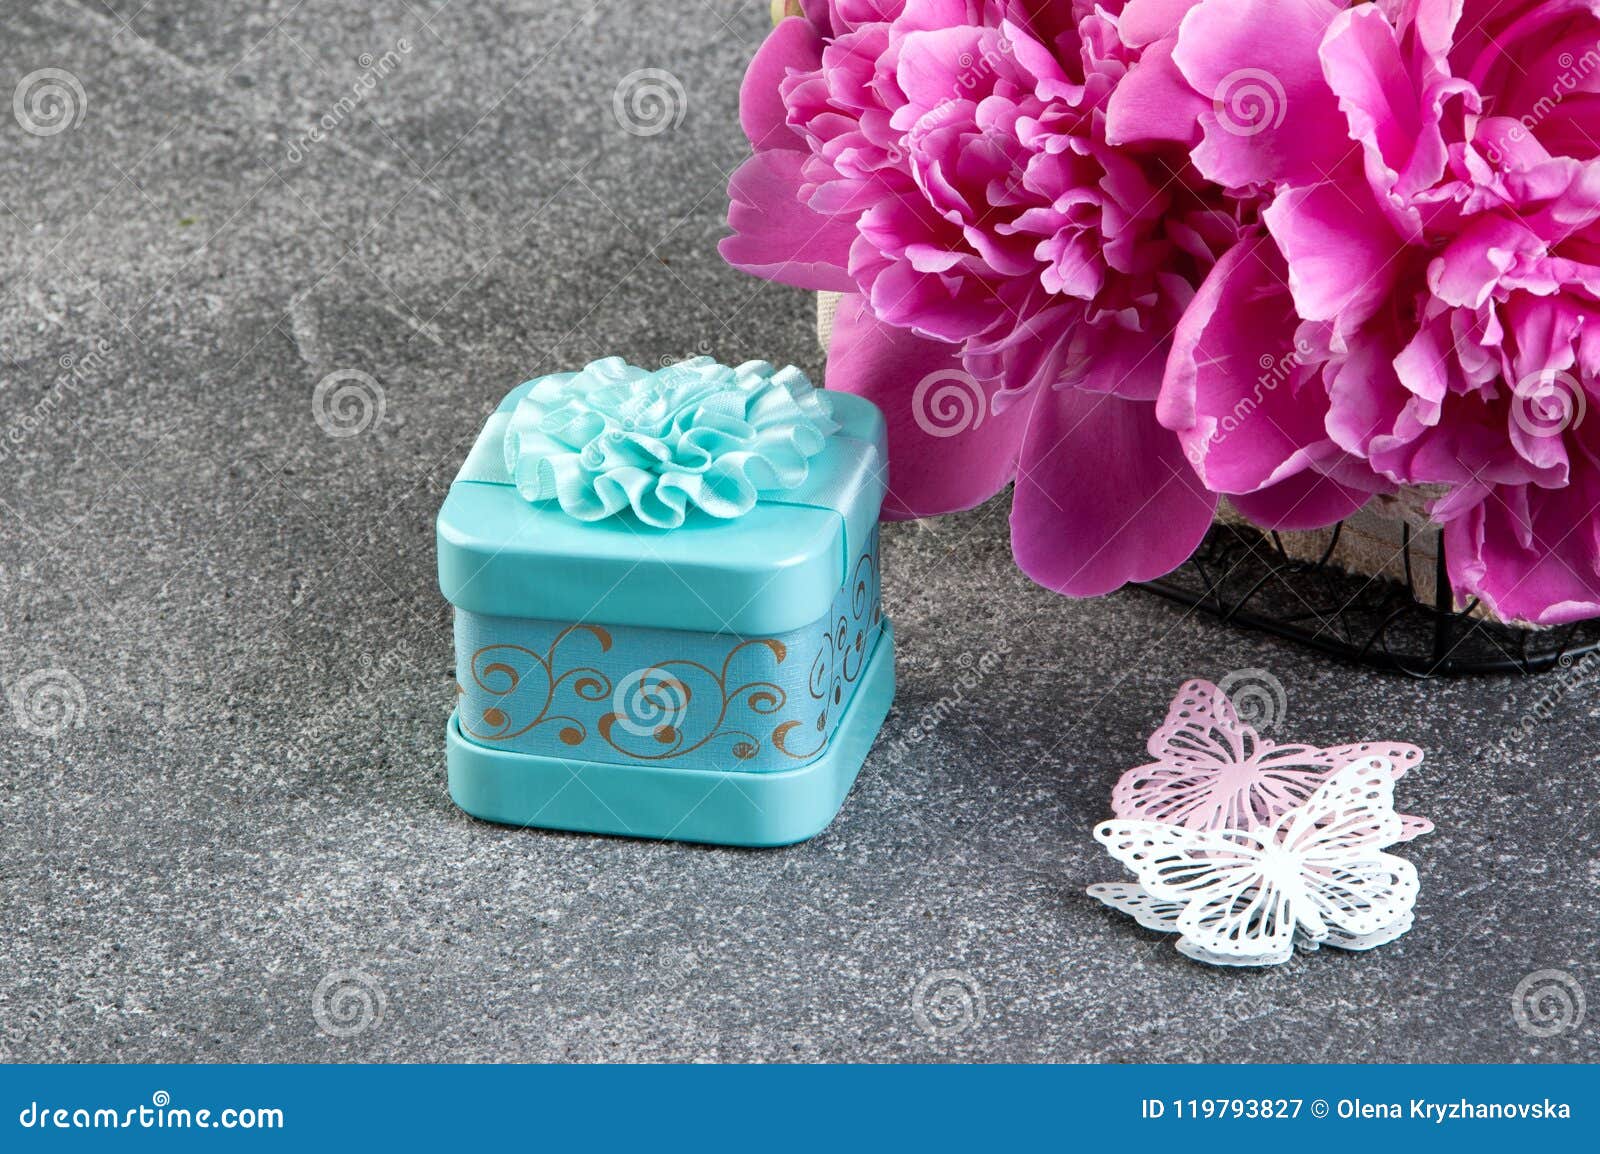 Pink Peony, Aquamarine Gift Box and Butterflies Stock Image - Image of ...